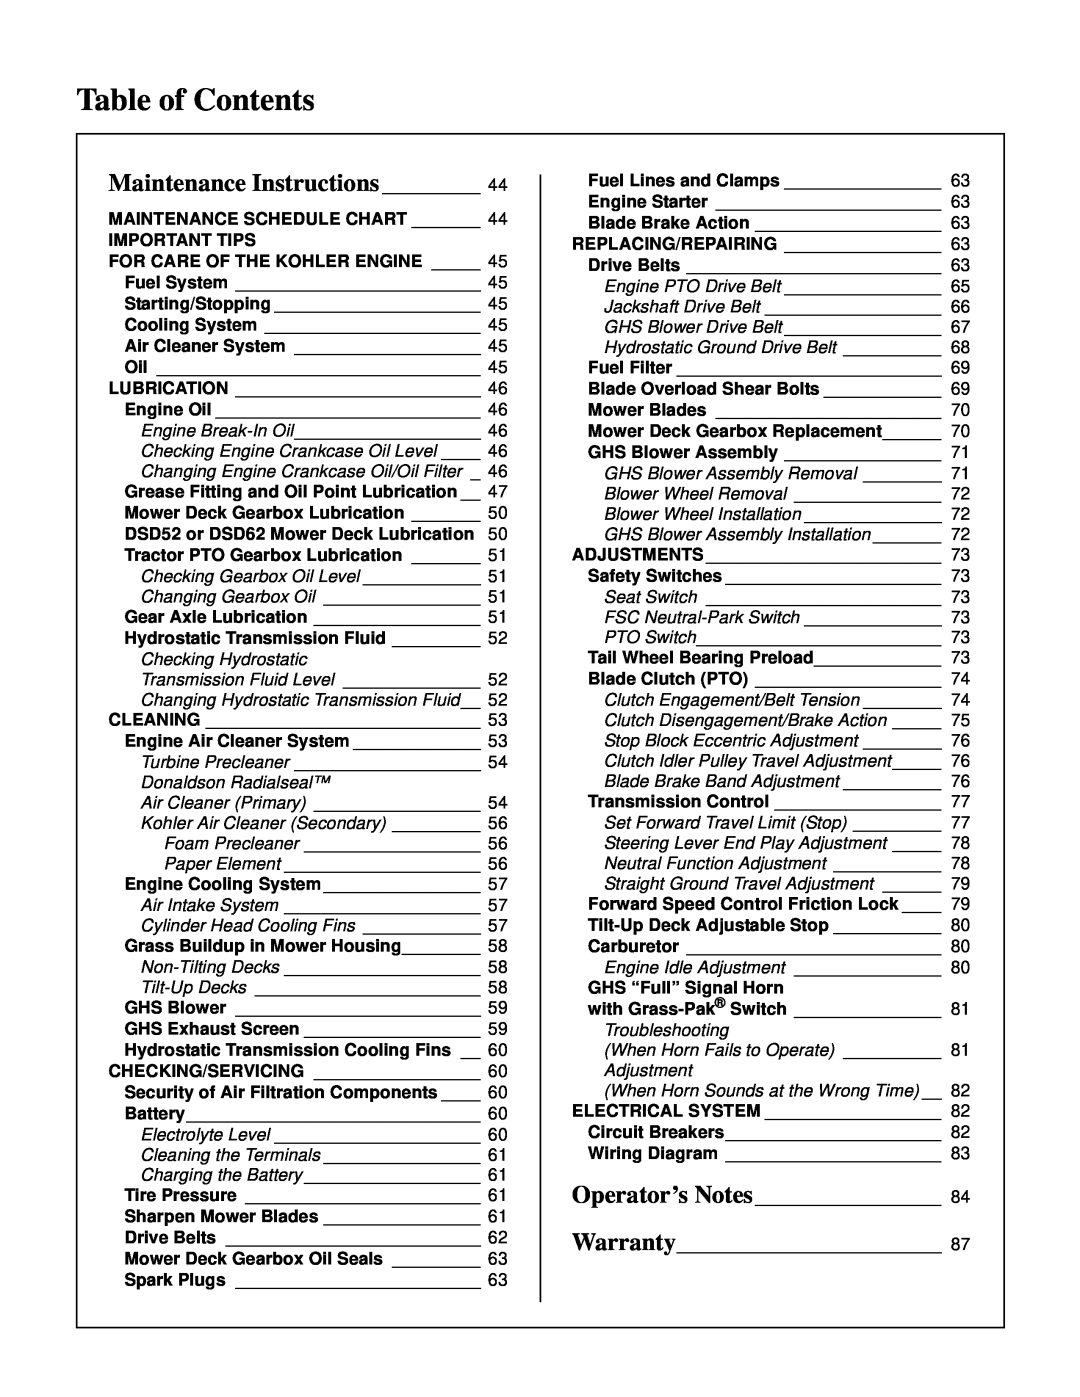 Walker MT Maintenance Instructions, Table of Contents, Maintenance Schedule Chart Important Tips, Engine Cooling System 